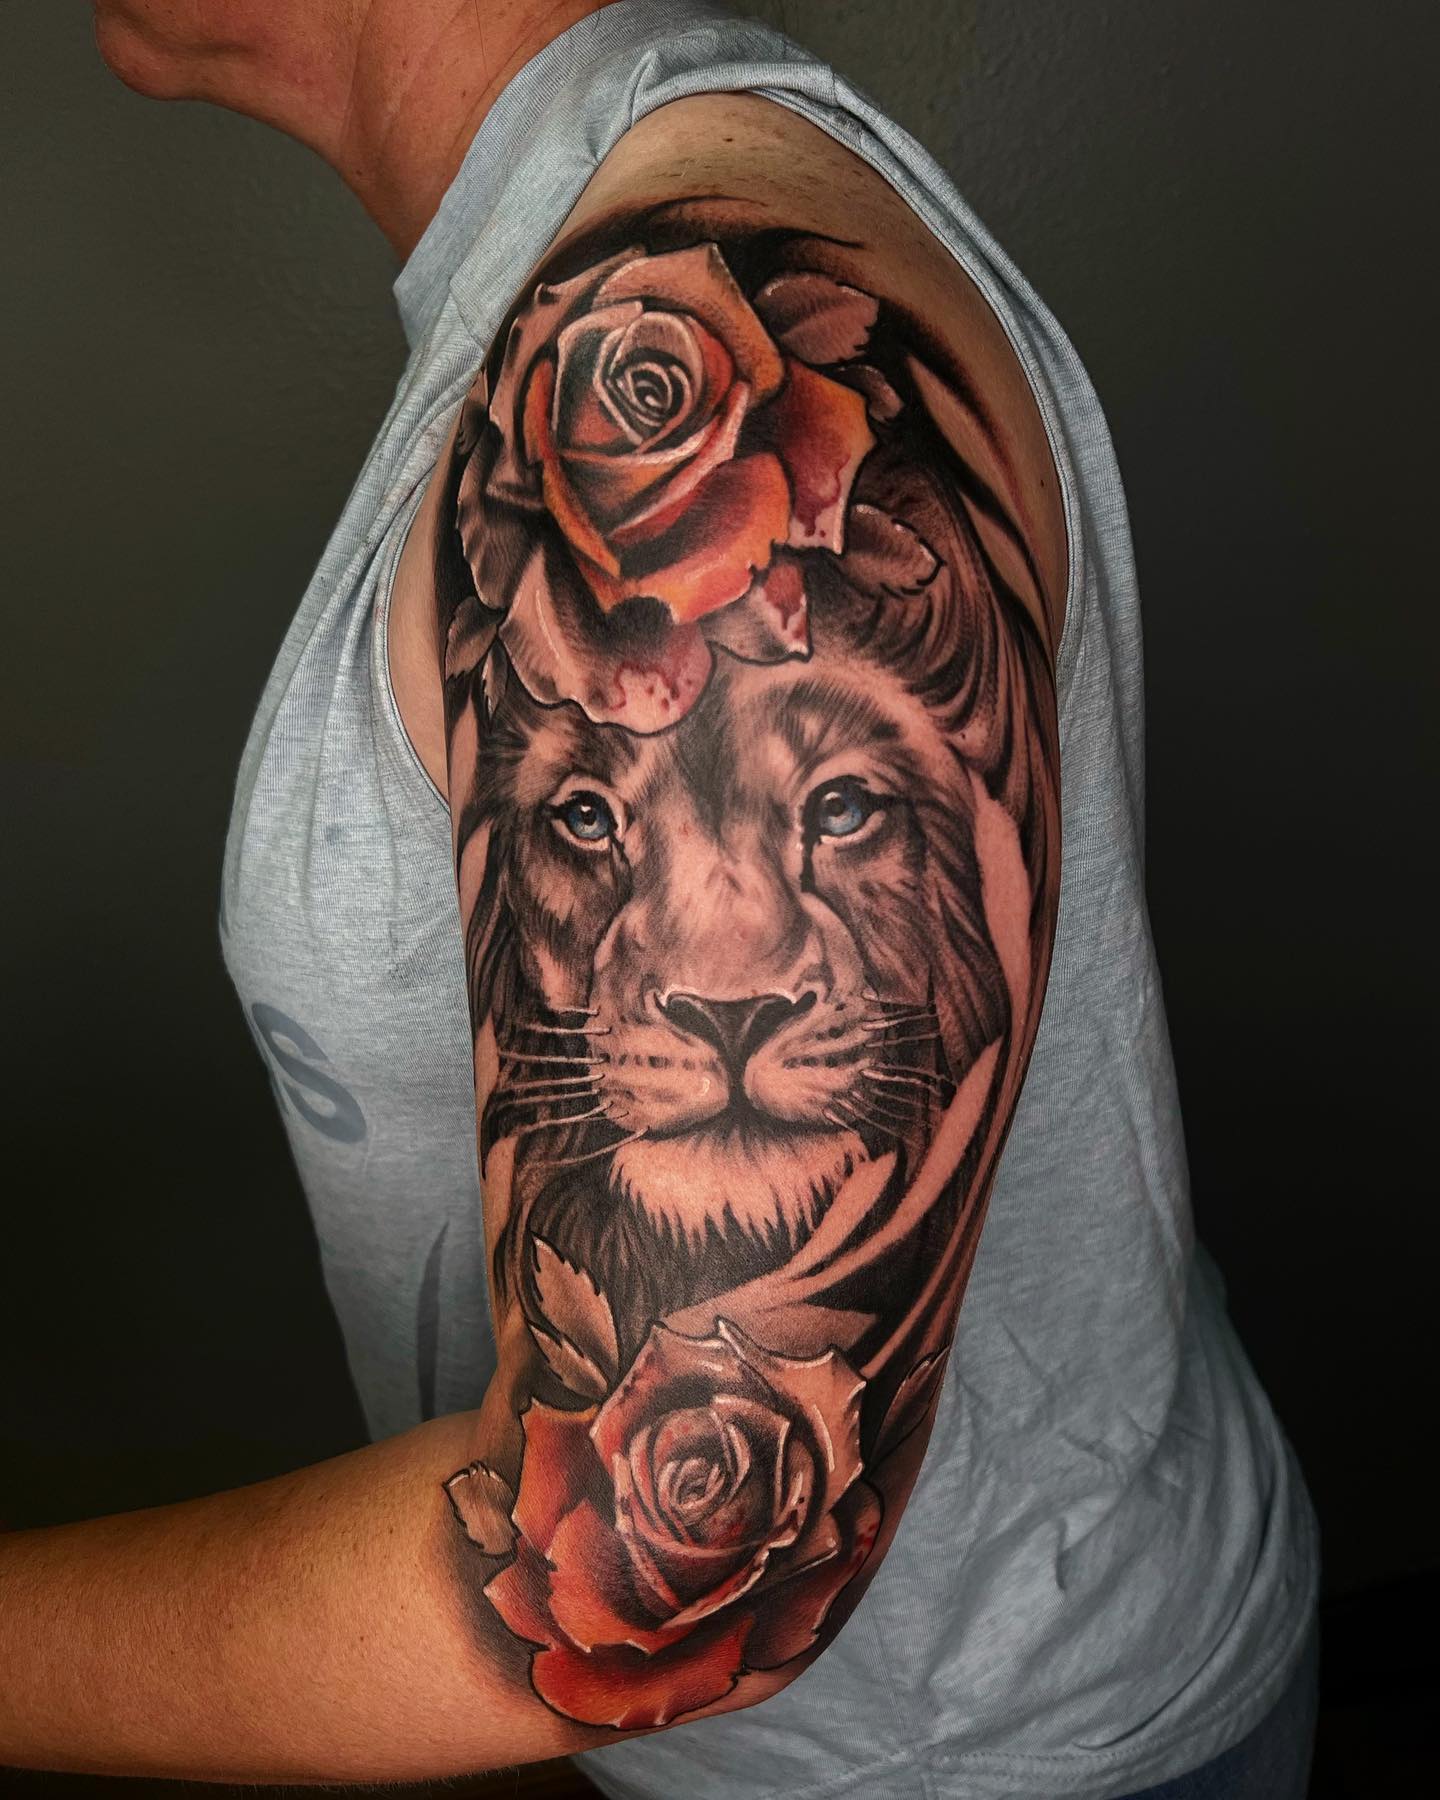 Roses are red, violets are blue This lion tattoo will suit on you